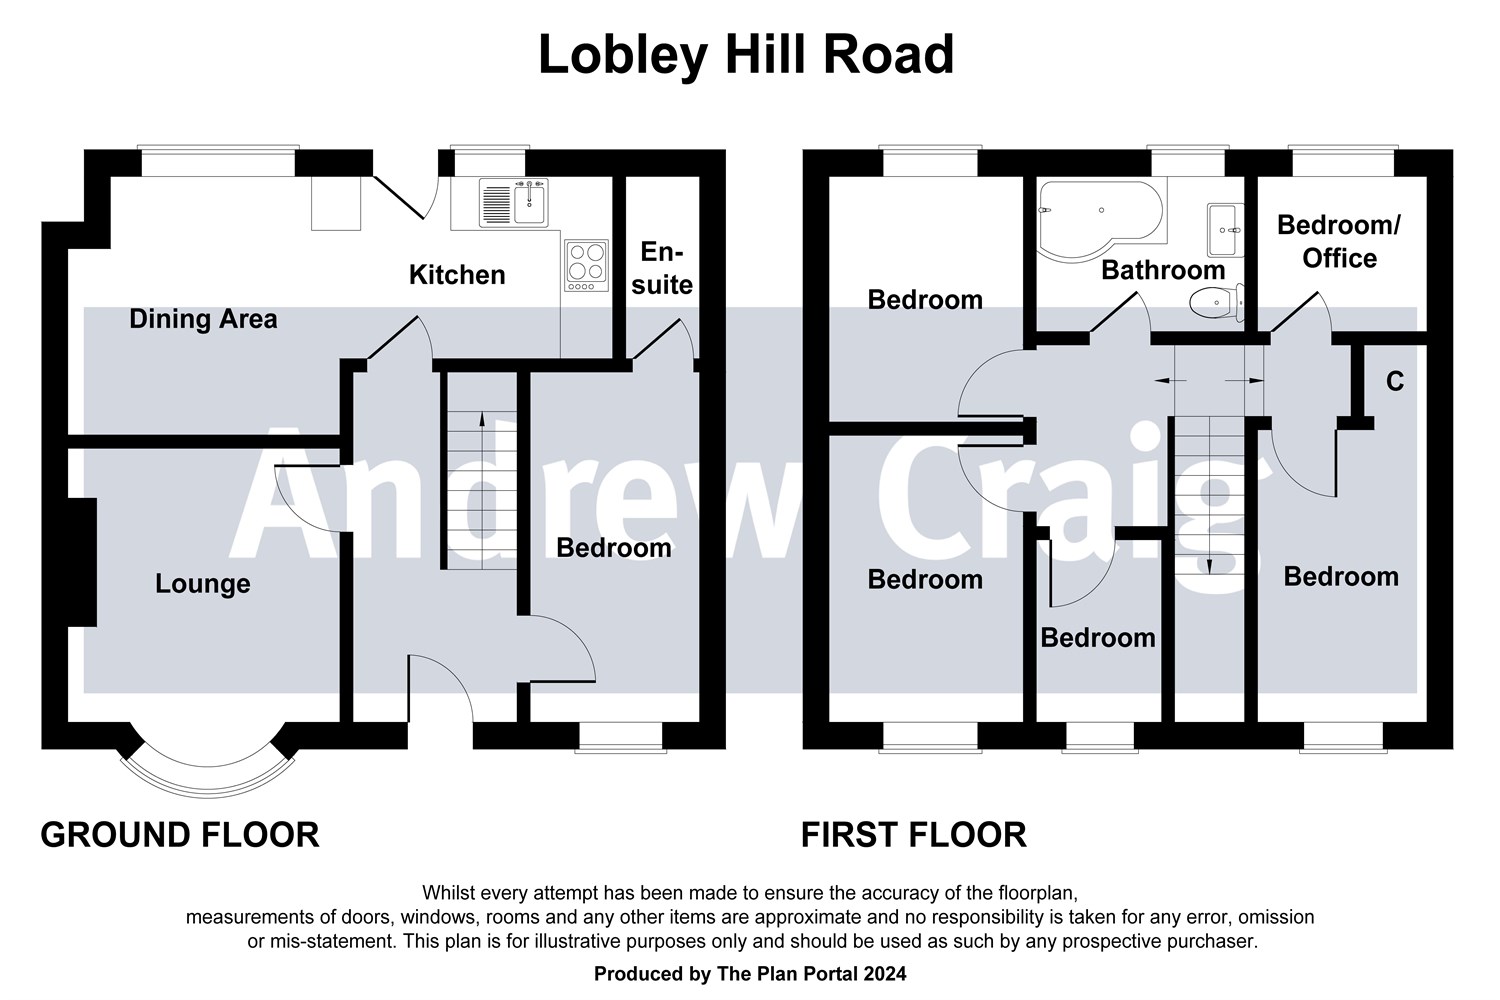 5 bed semi-detached house for sale in Lobley Hill Road, Lobley Hill - Property floorplan